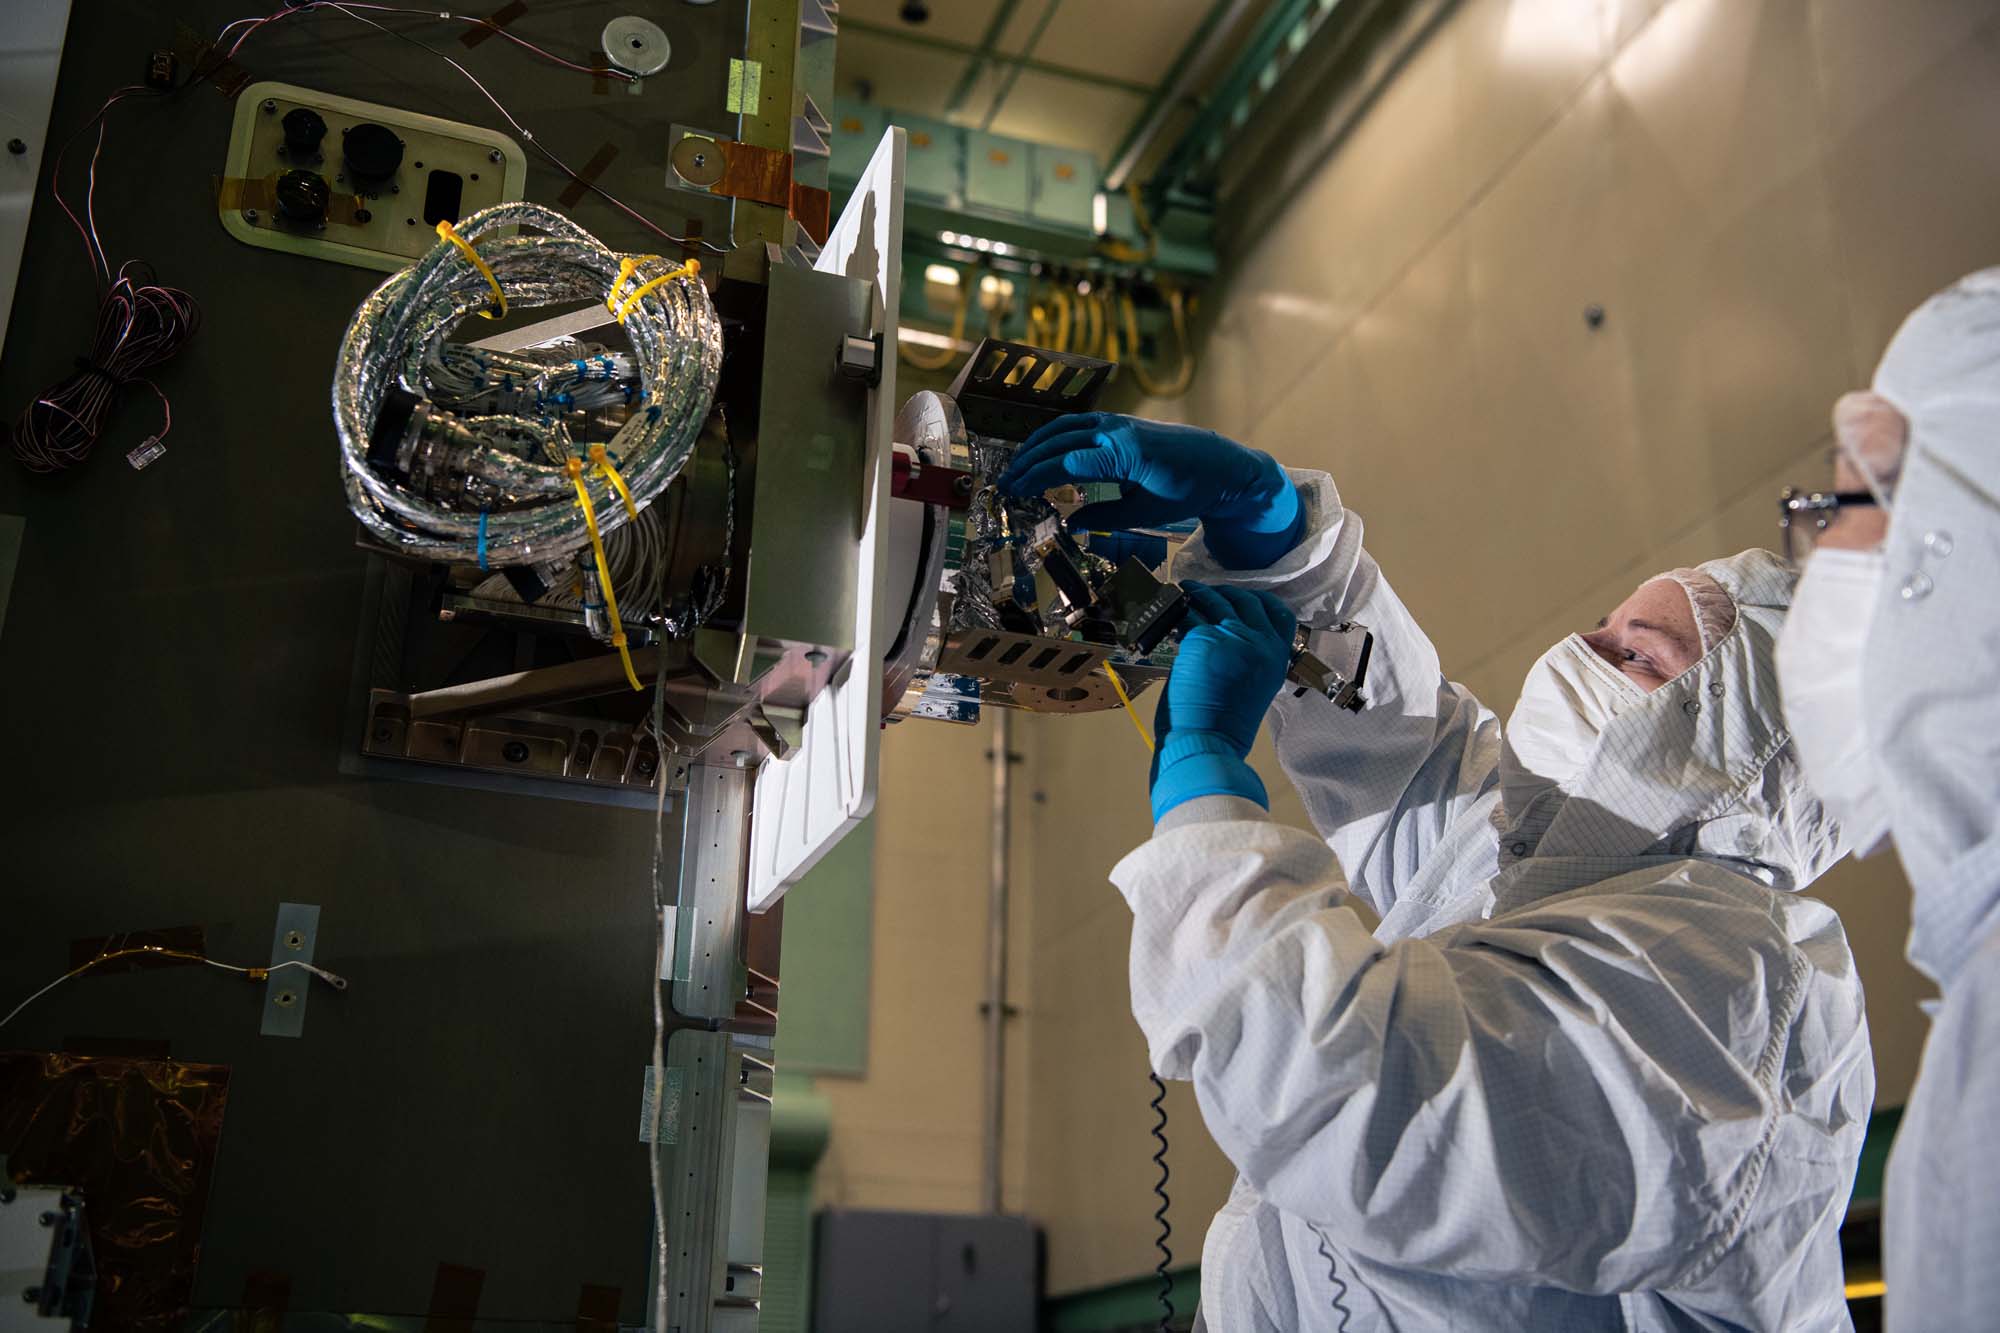 Installing the solar array drive assembly on the PACE spacecraft bus.